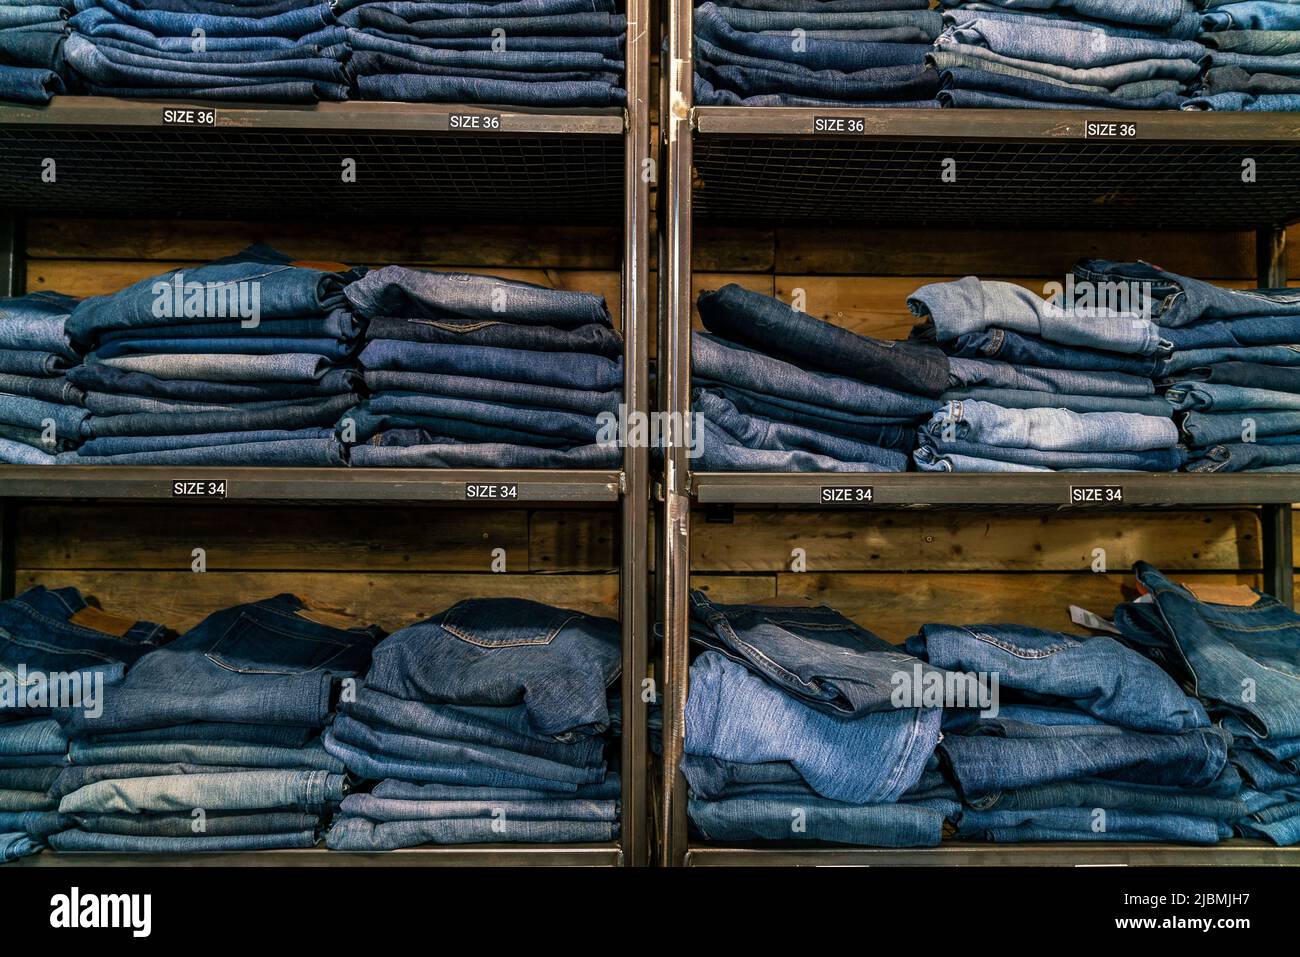 Different sizes of blue denim jeans on display in a high street clothes shop or store Stock Photo